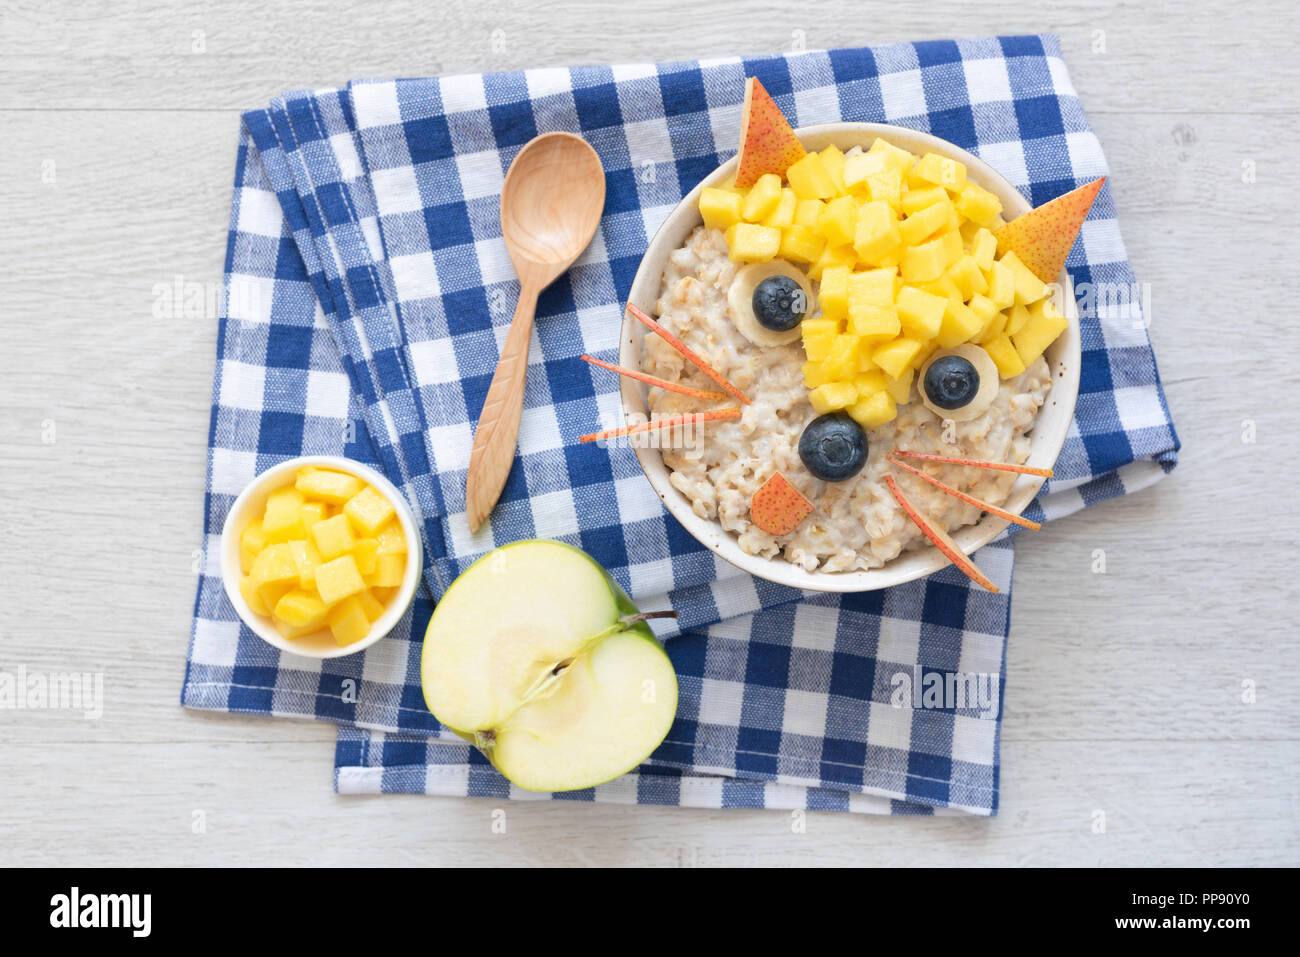 Funny Breakfast For Kids. Oatmeal Porridge With Cute Fruit Face. Porridge with fruits and berries for healthy breakfast Stock Photo